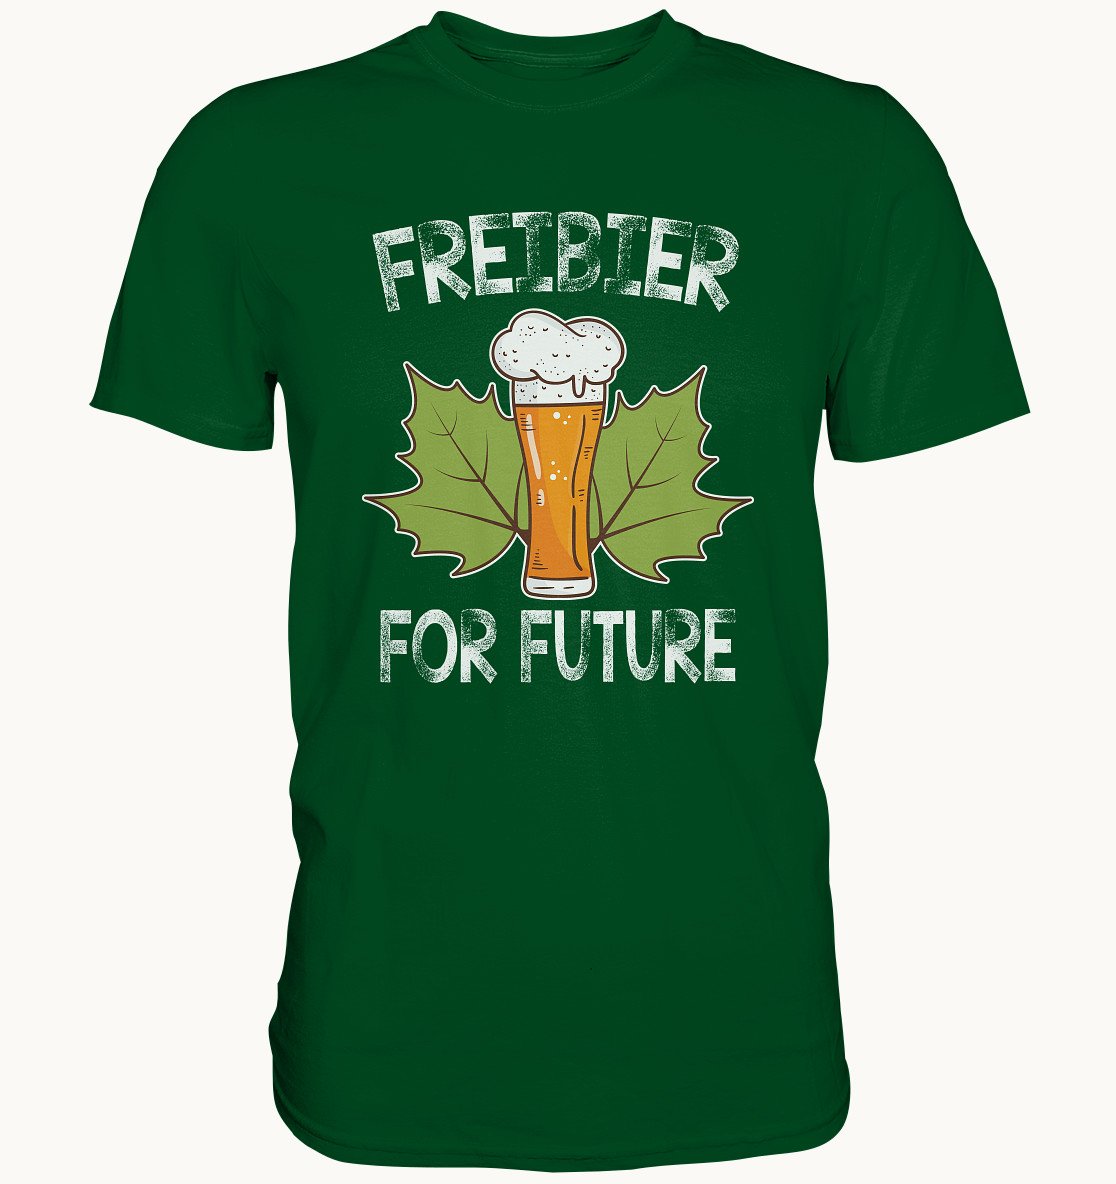 Freibier for future - Beer lover